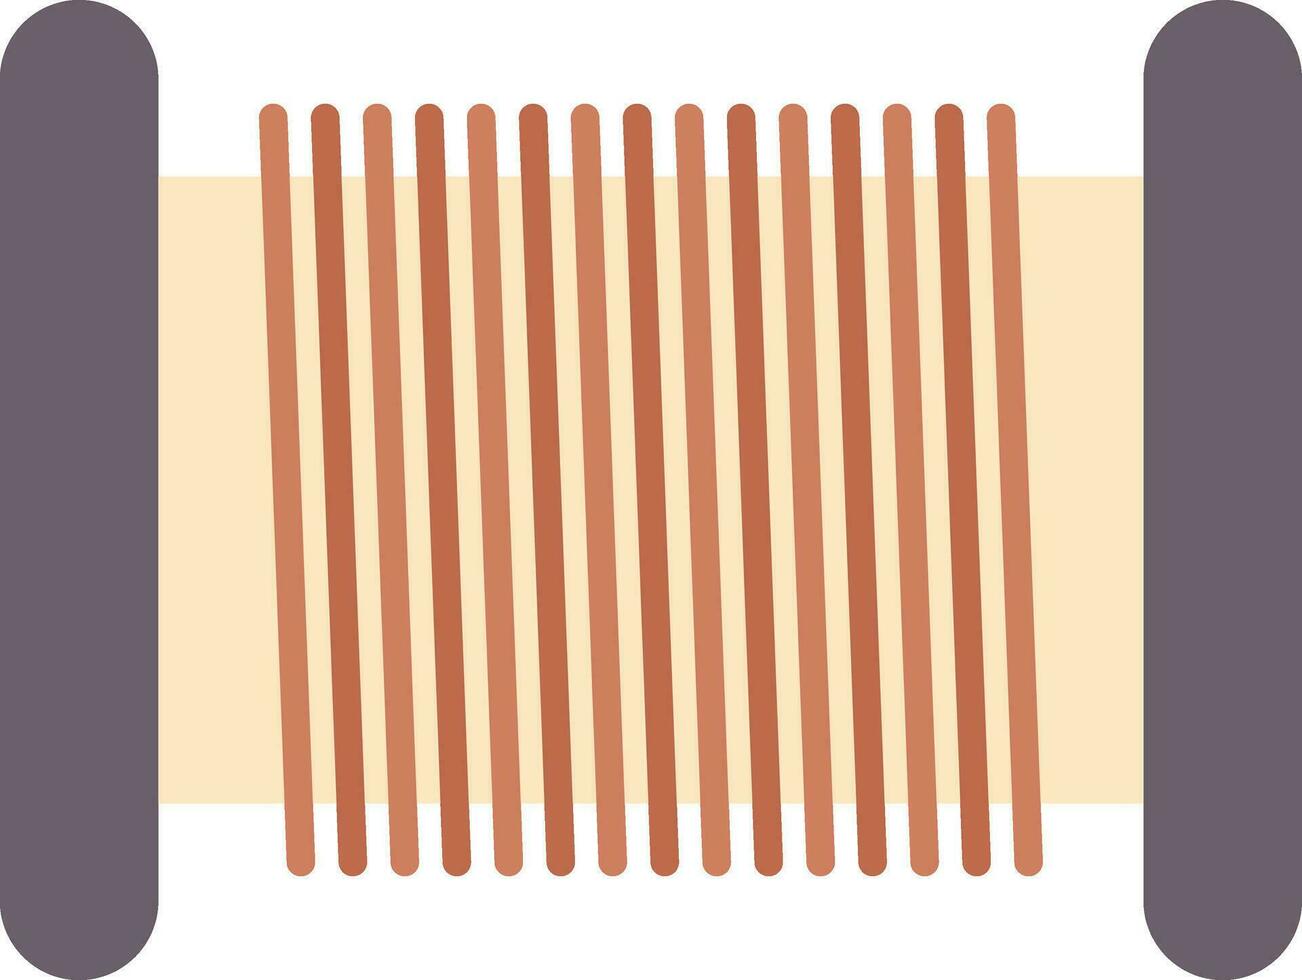 Cable Roll Vector Icon